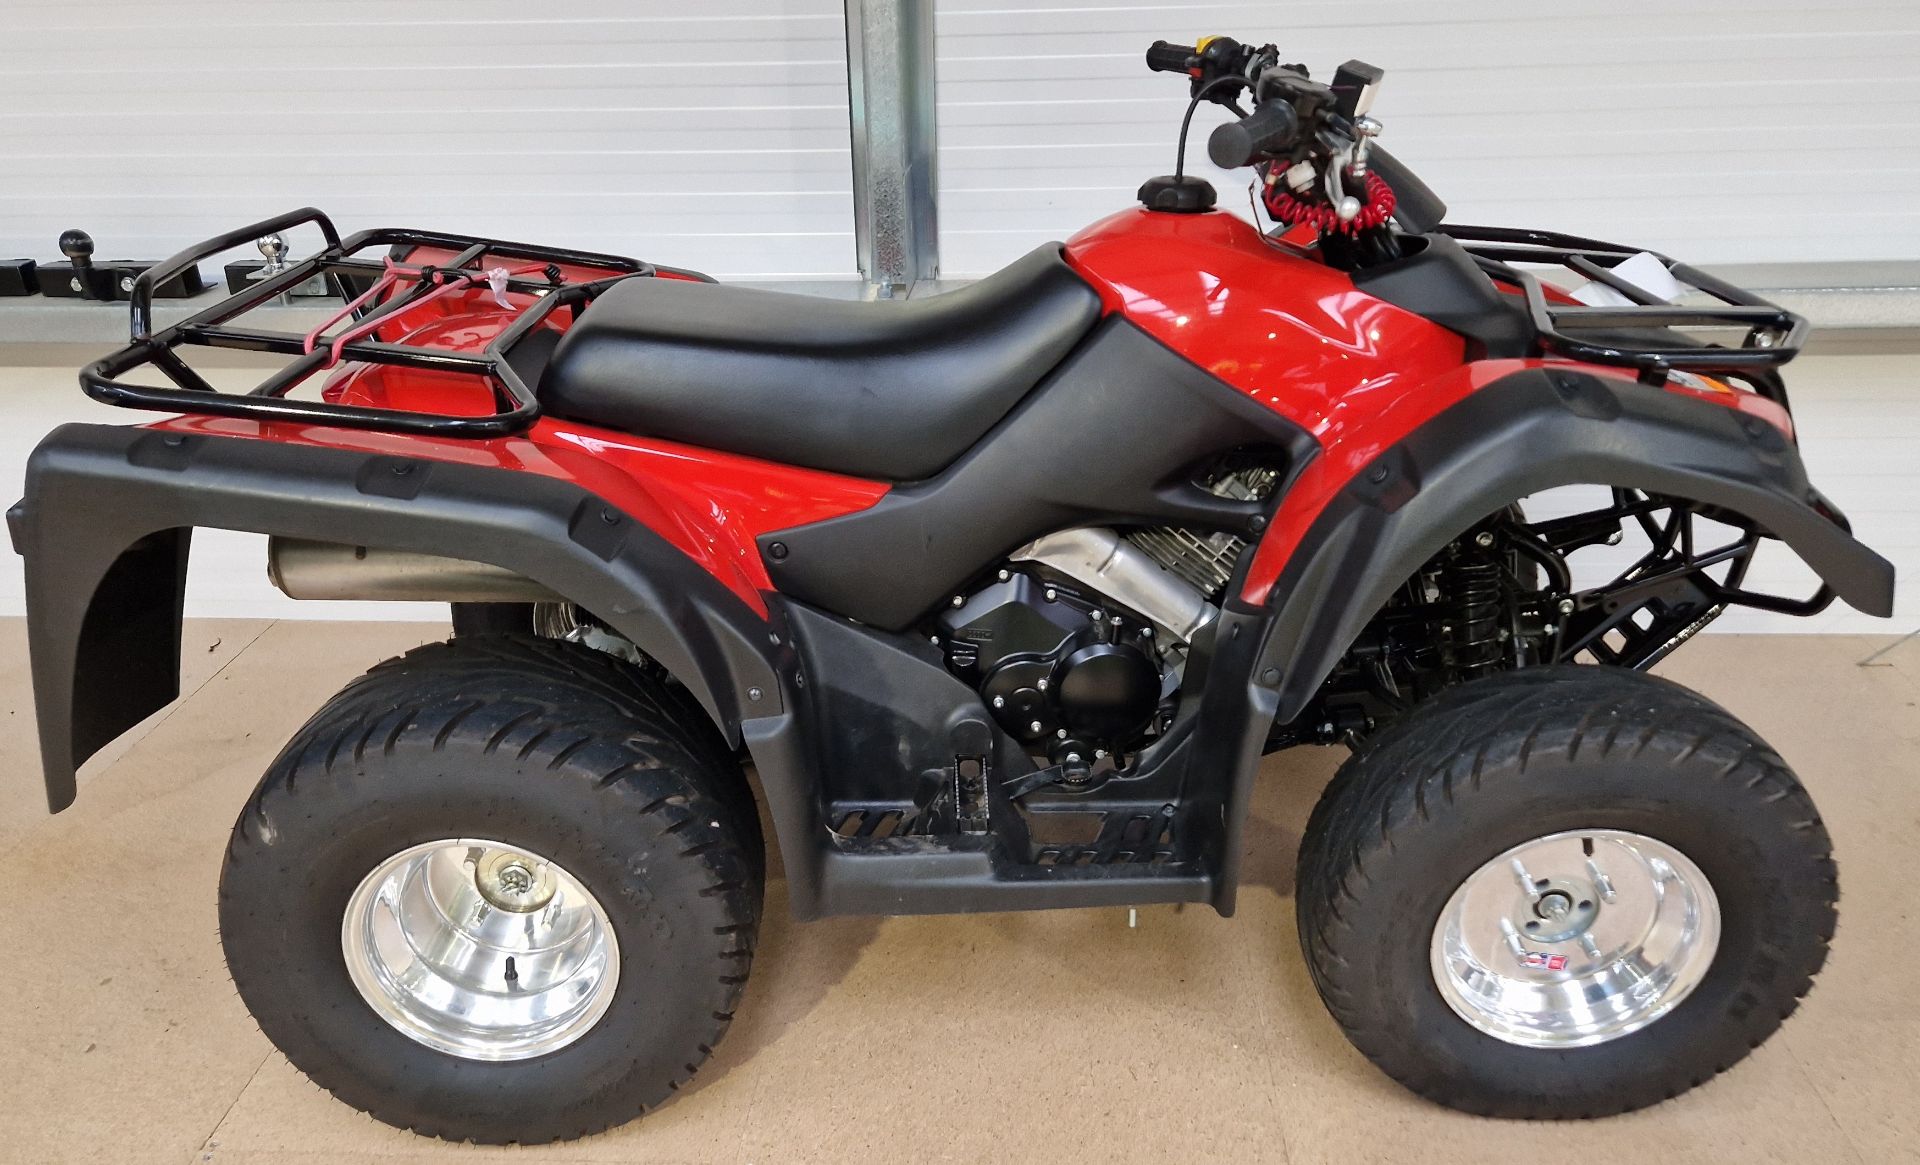 One SUZUKI LT-F250 Quad Bike with fitted Luggage Racks Front and Rear - Image 2 of 4